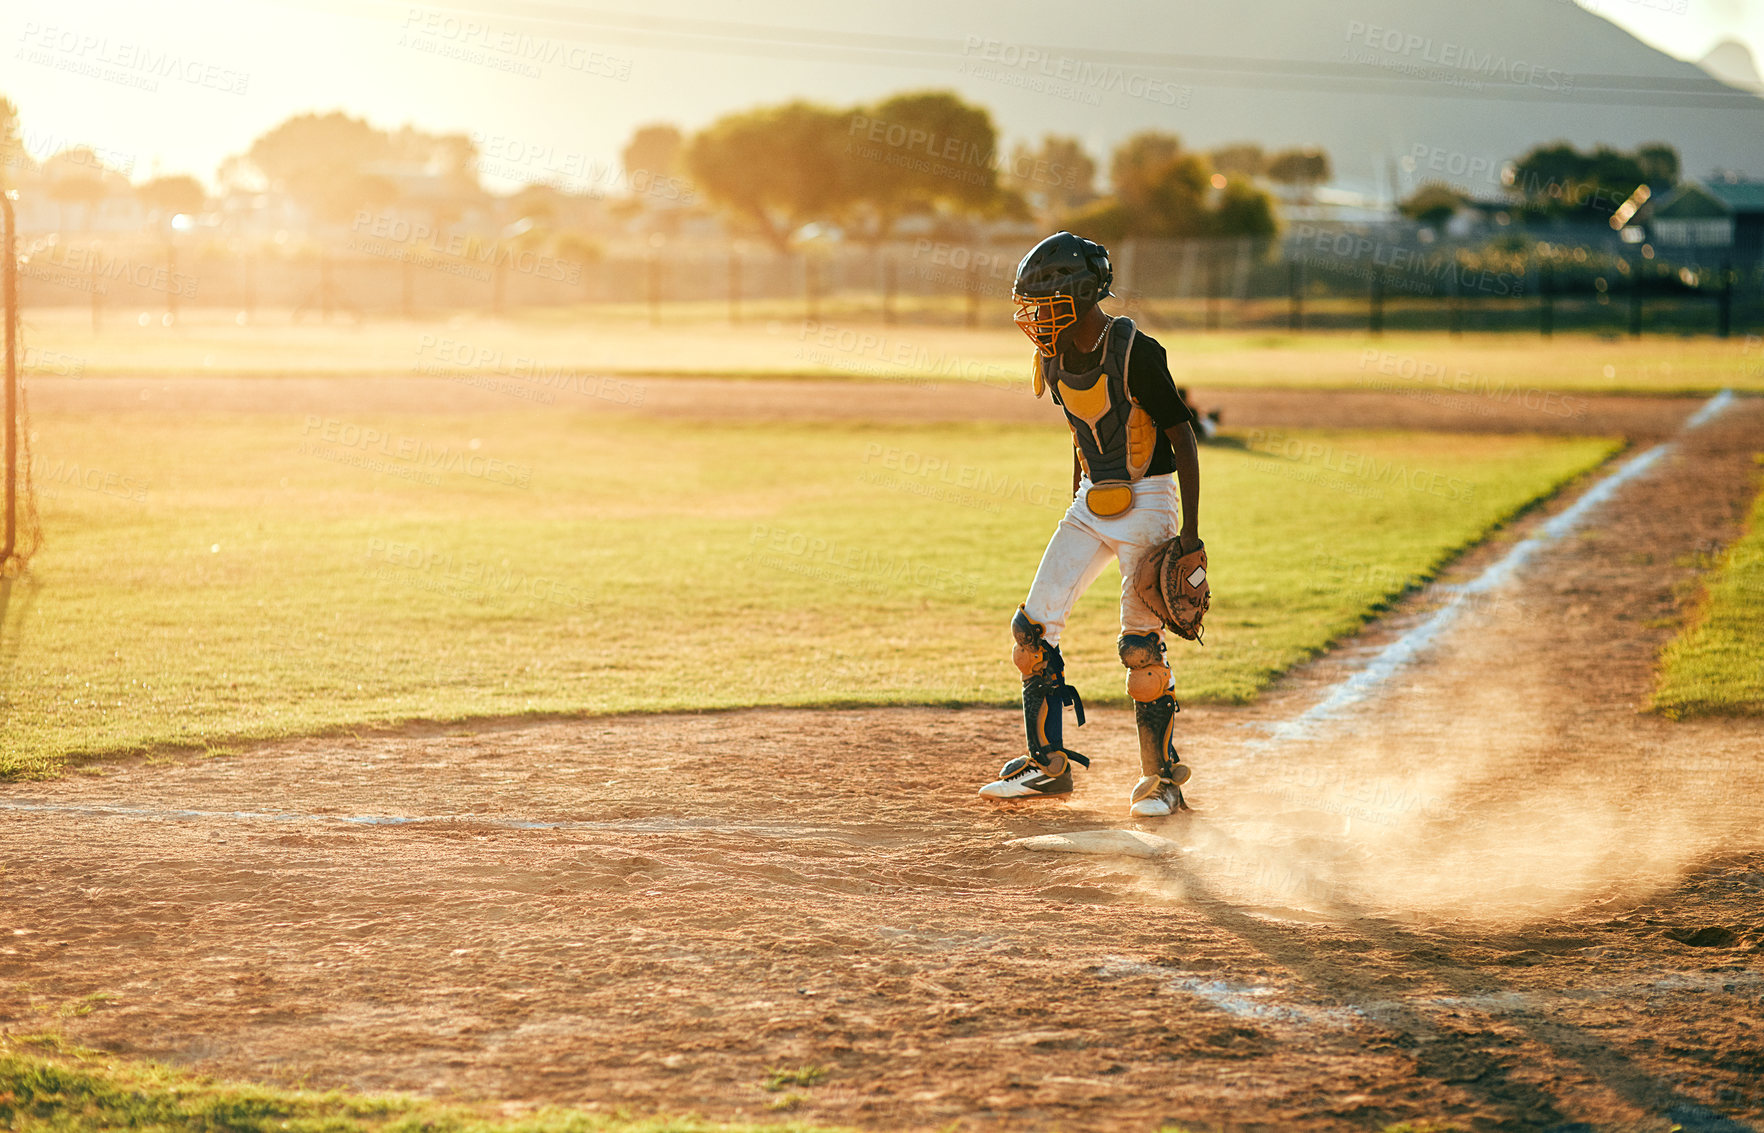 Buy stock photo Shot of a baseball player running during a match